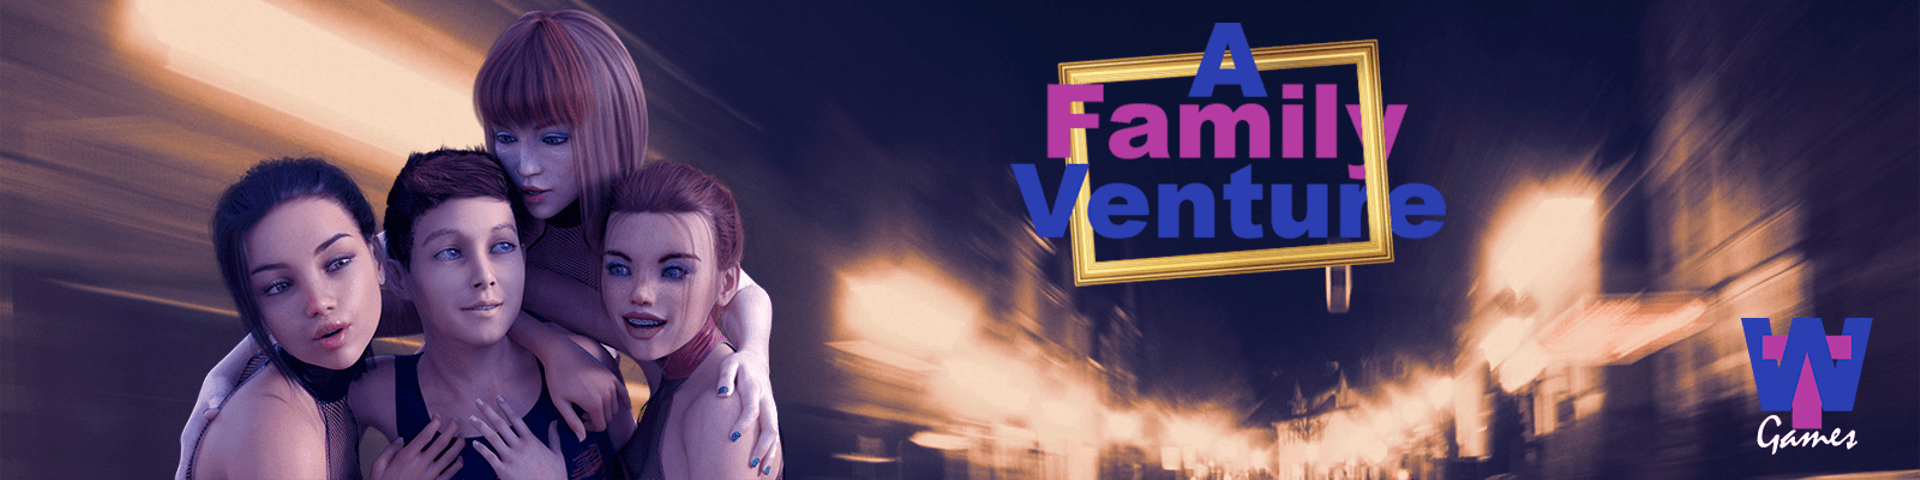 A Family Venture – Version 0.05b - Patreon incest adult game 7